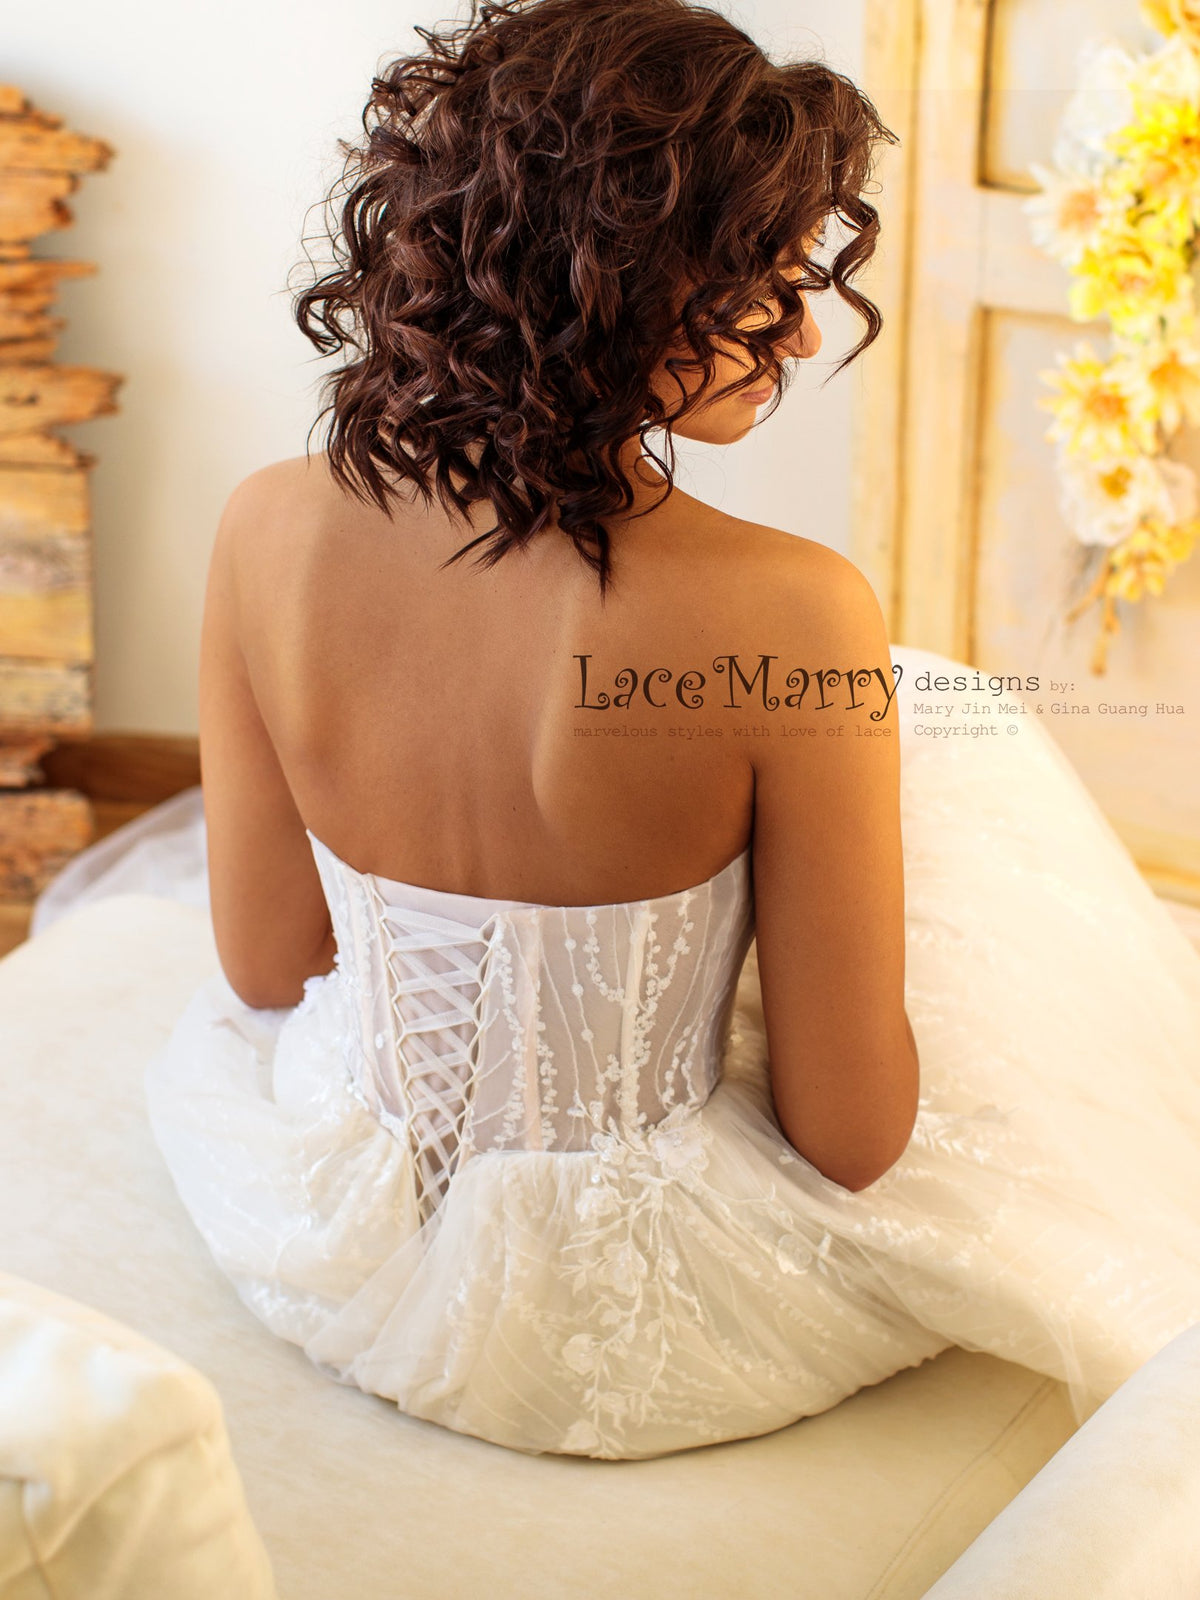 Bridal Corsets, Low Back Wedding Corsets & Bustier for wedding